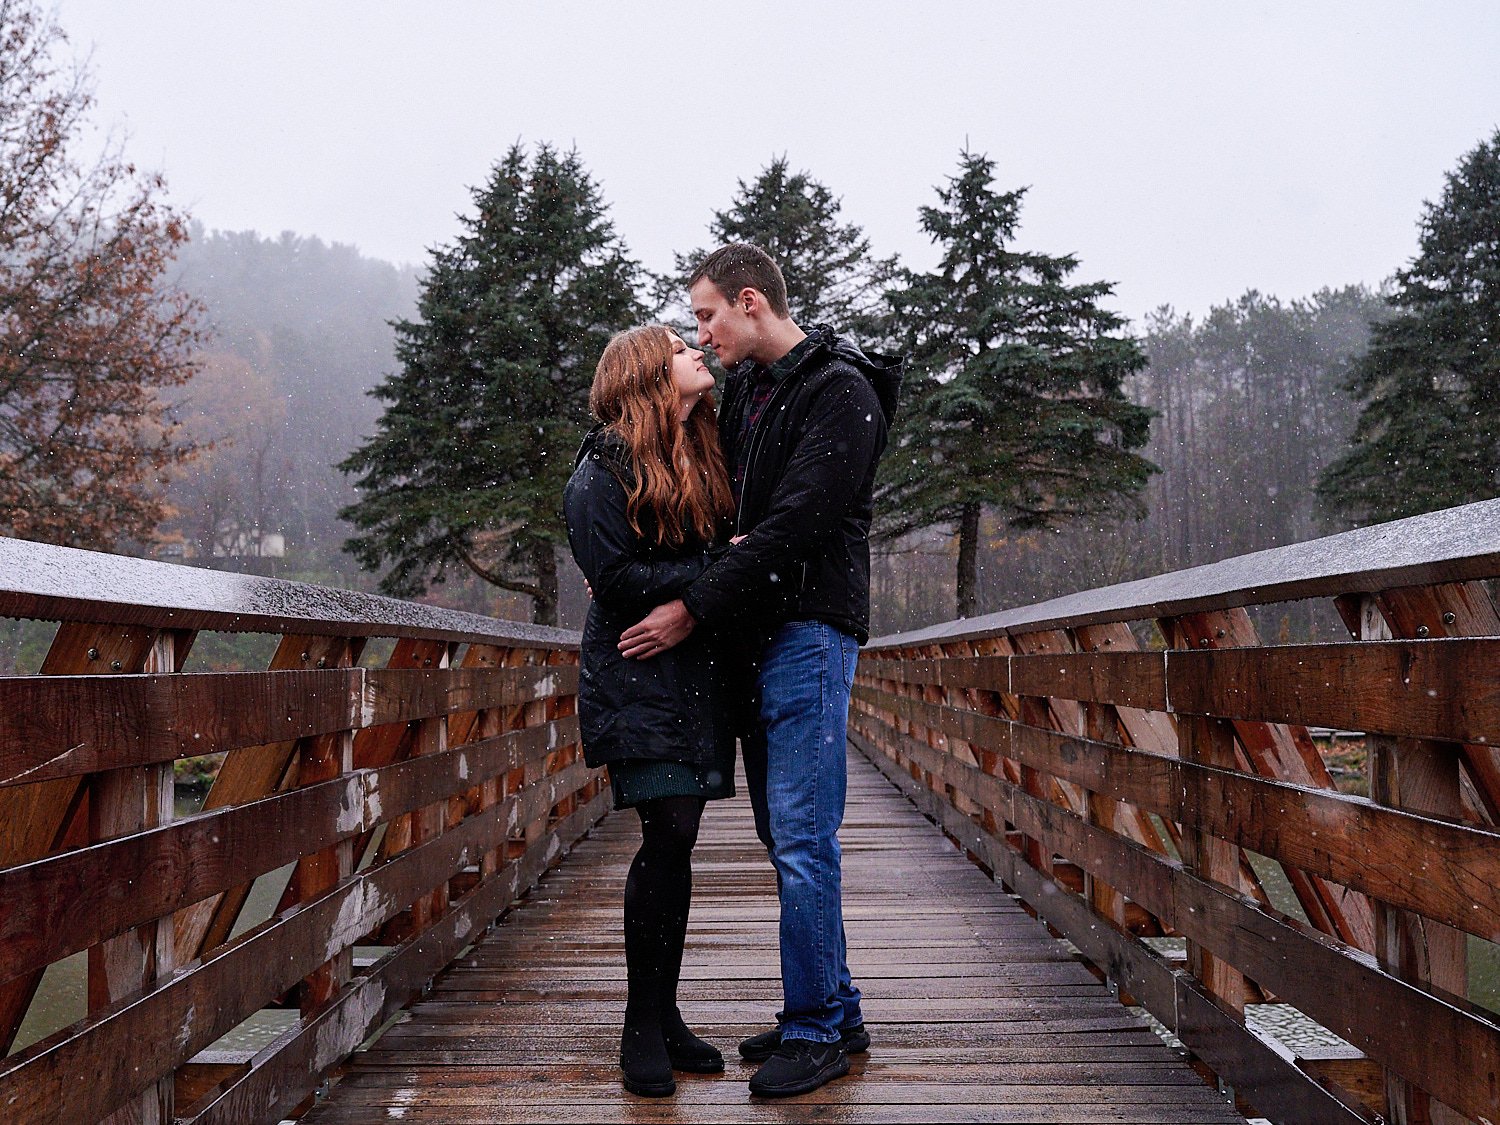  Victoria Detweiler is posing with her new husband on Marshall Island in North Park, Allegheny County near Pittsburgh, Pennsylvania. It’s very cold and it’s snowing. The trees around have few colors. 